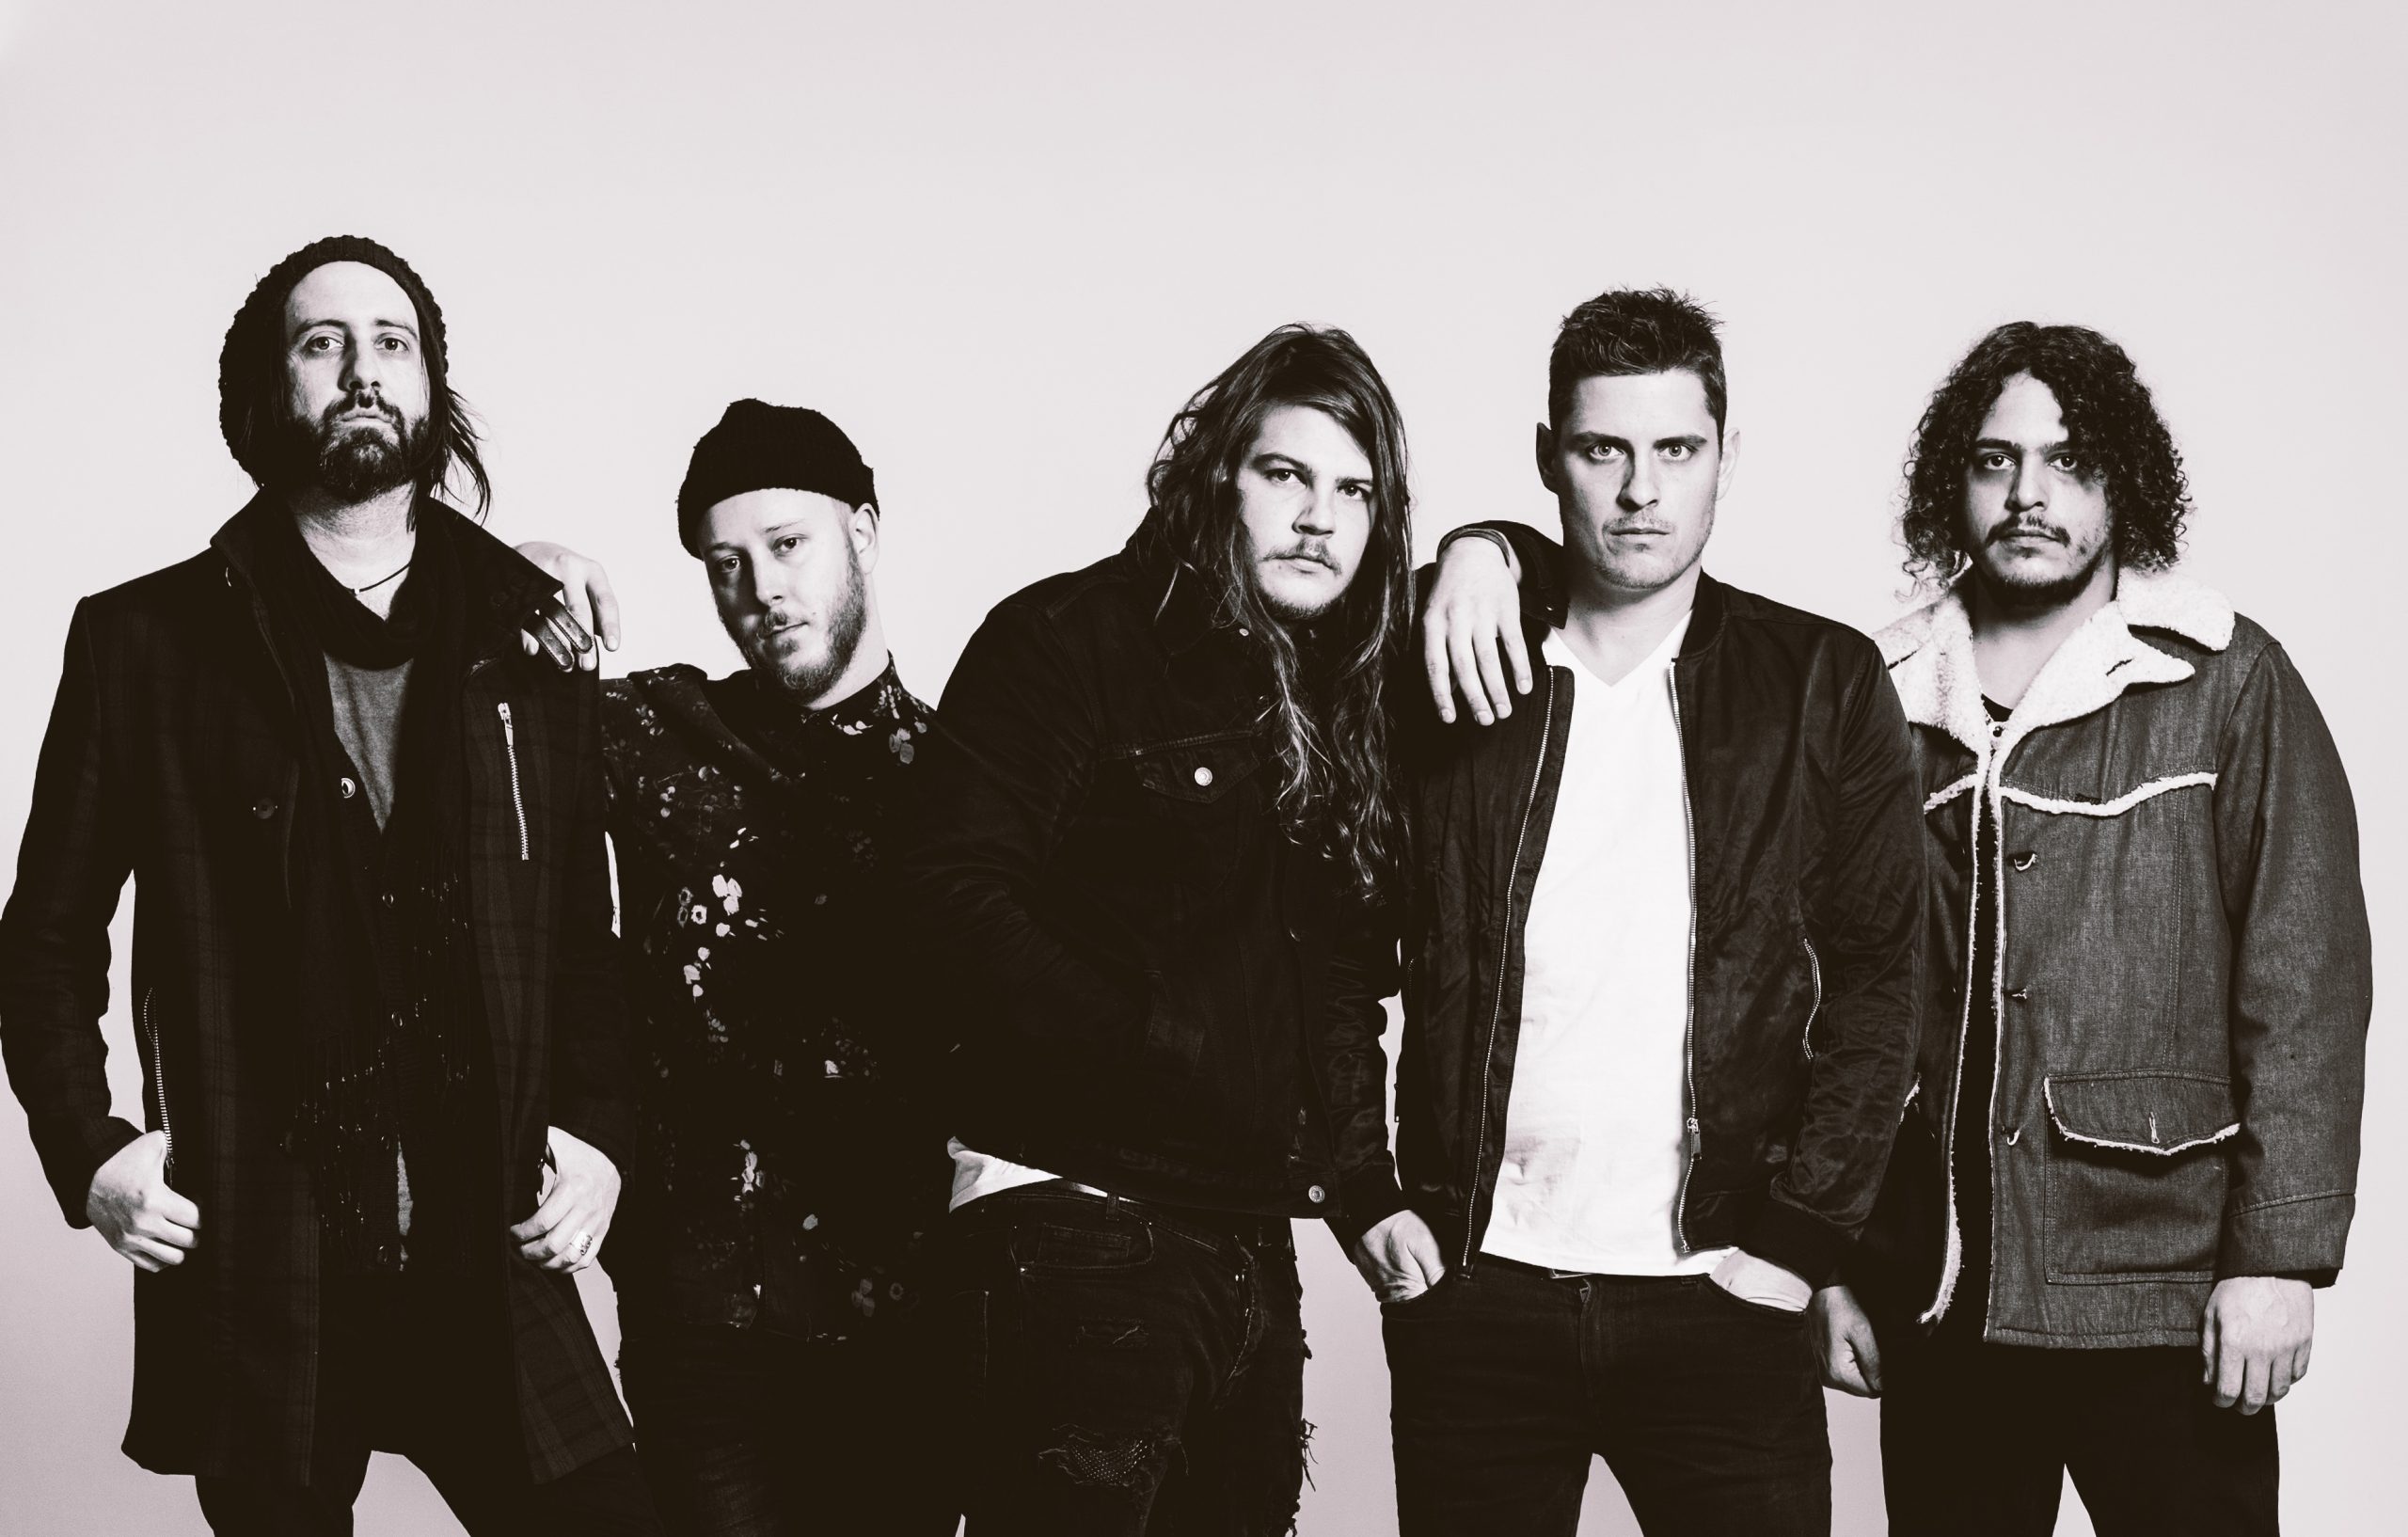 THE GLORIOUS SONS reveal new song 'Don't Live Fast' - Listen Now 